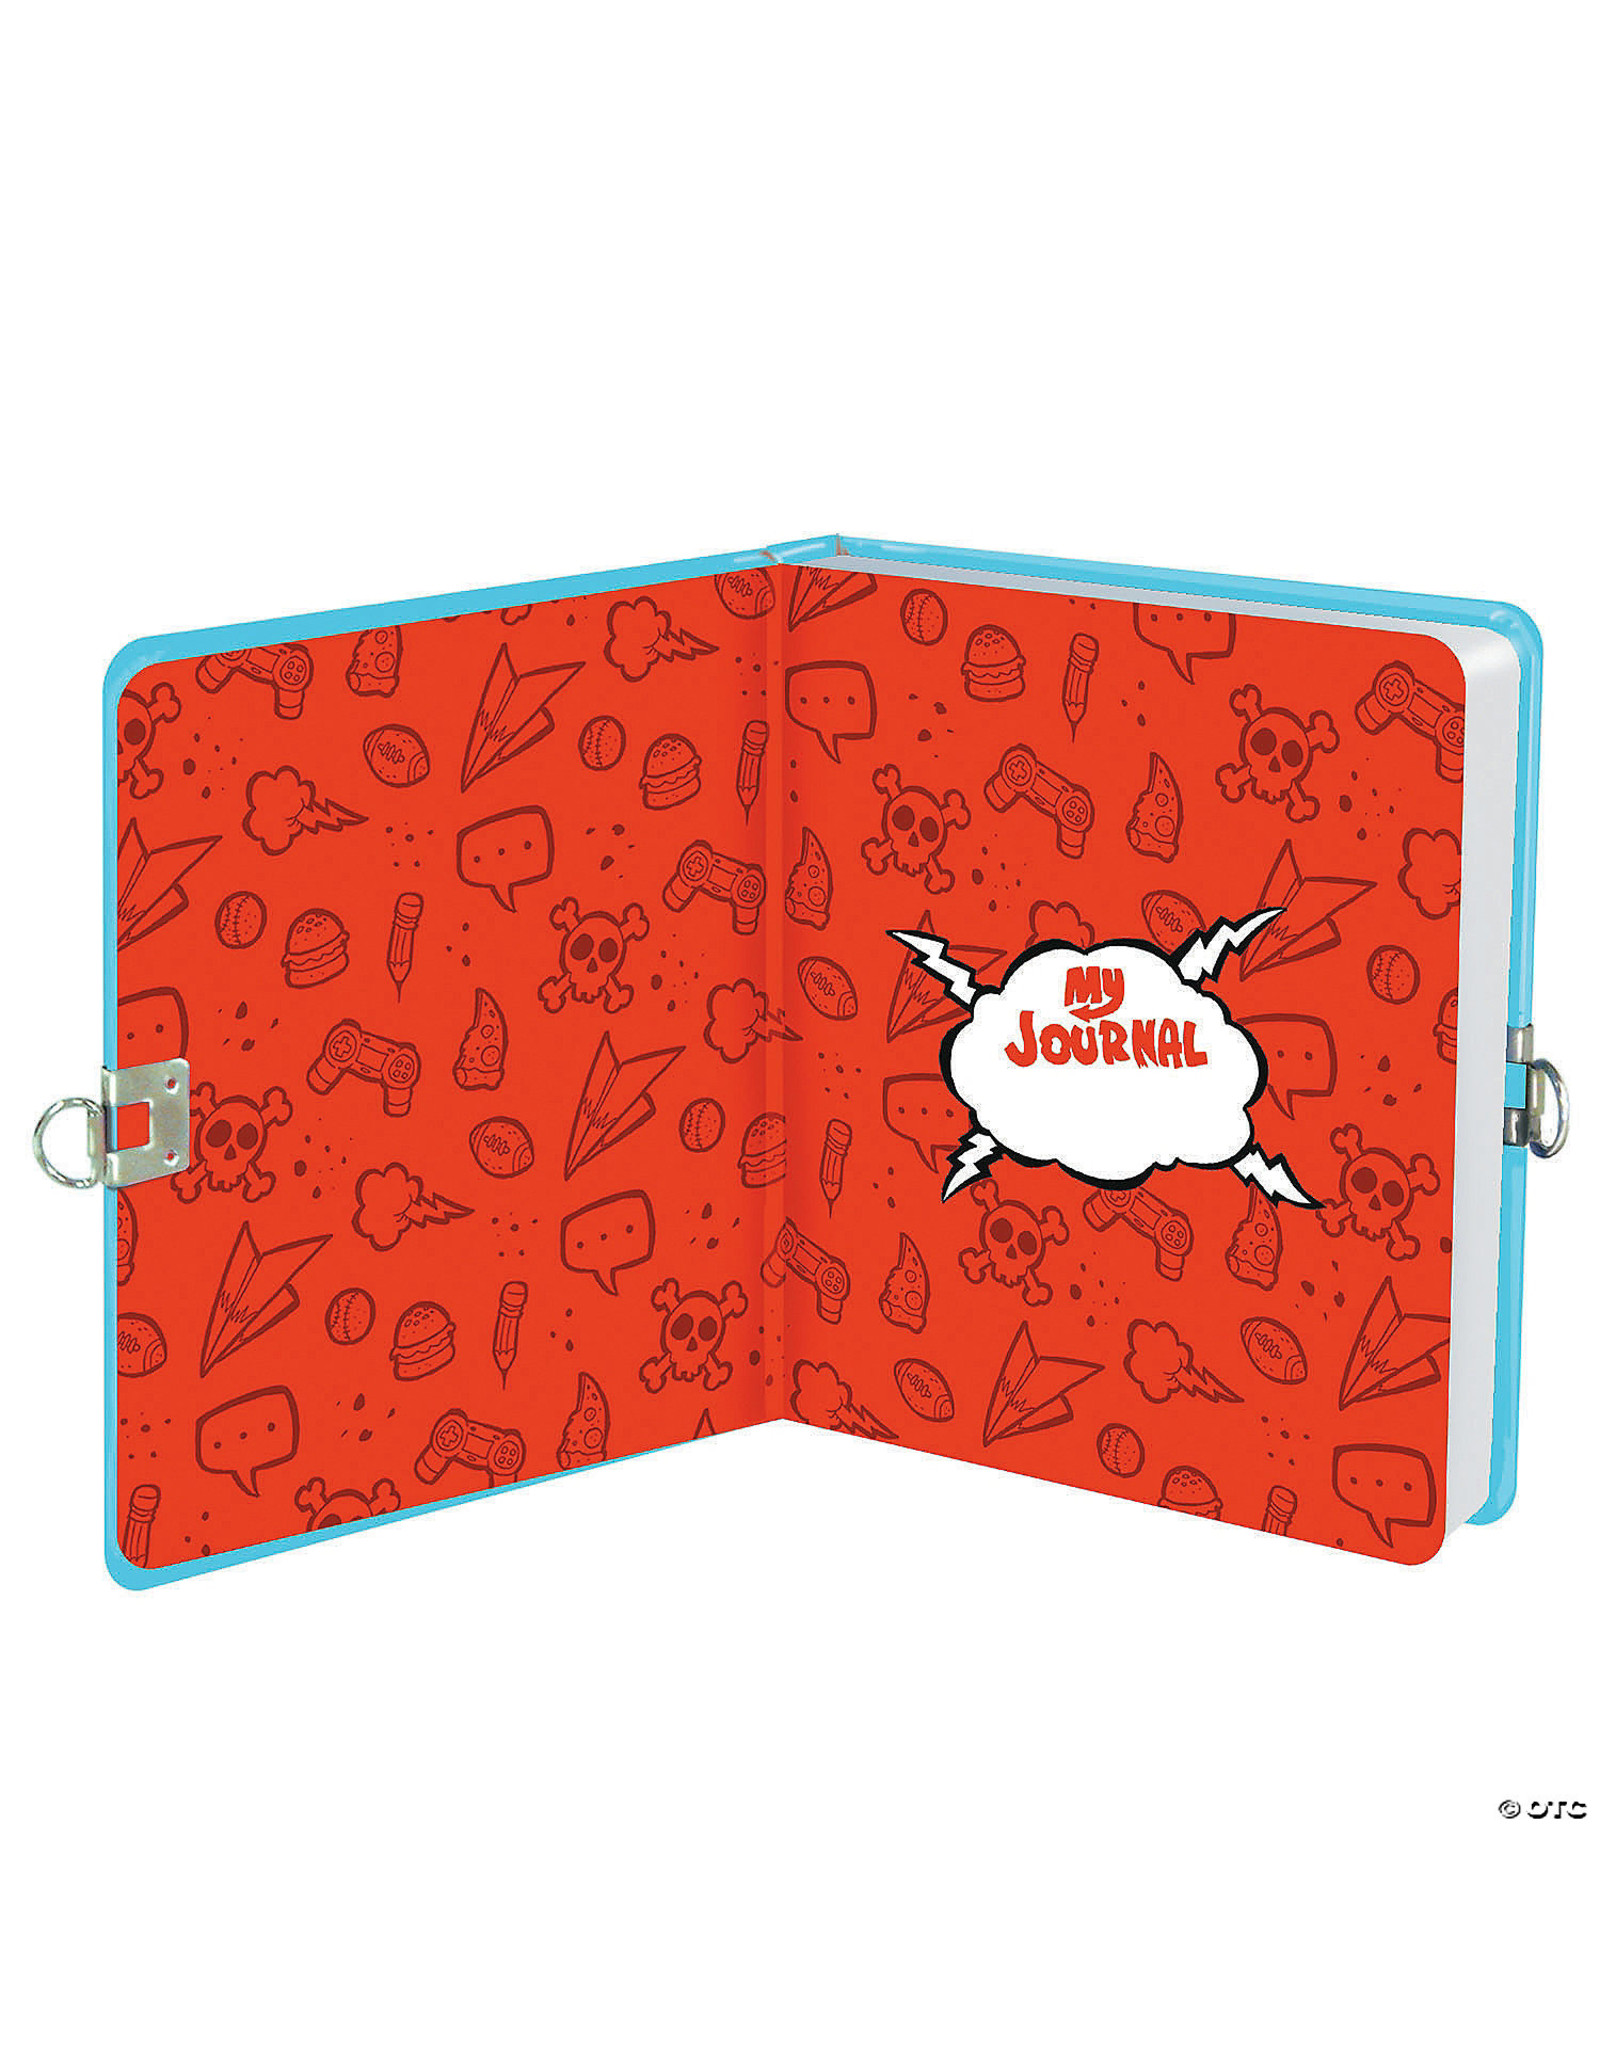 Peaceable Kingdom Doodles Diary With Key-Keeper Necklaces